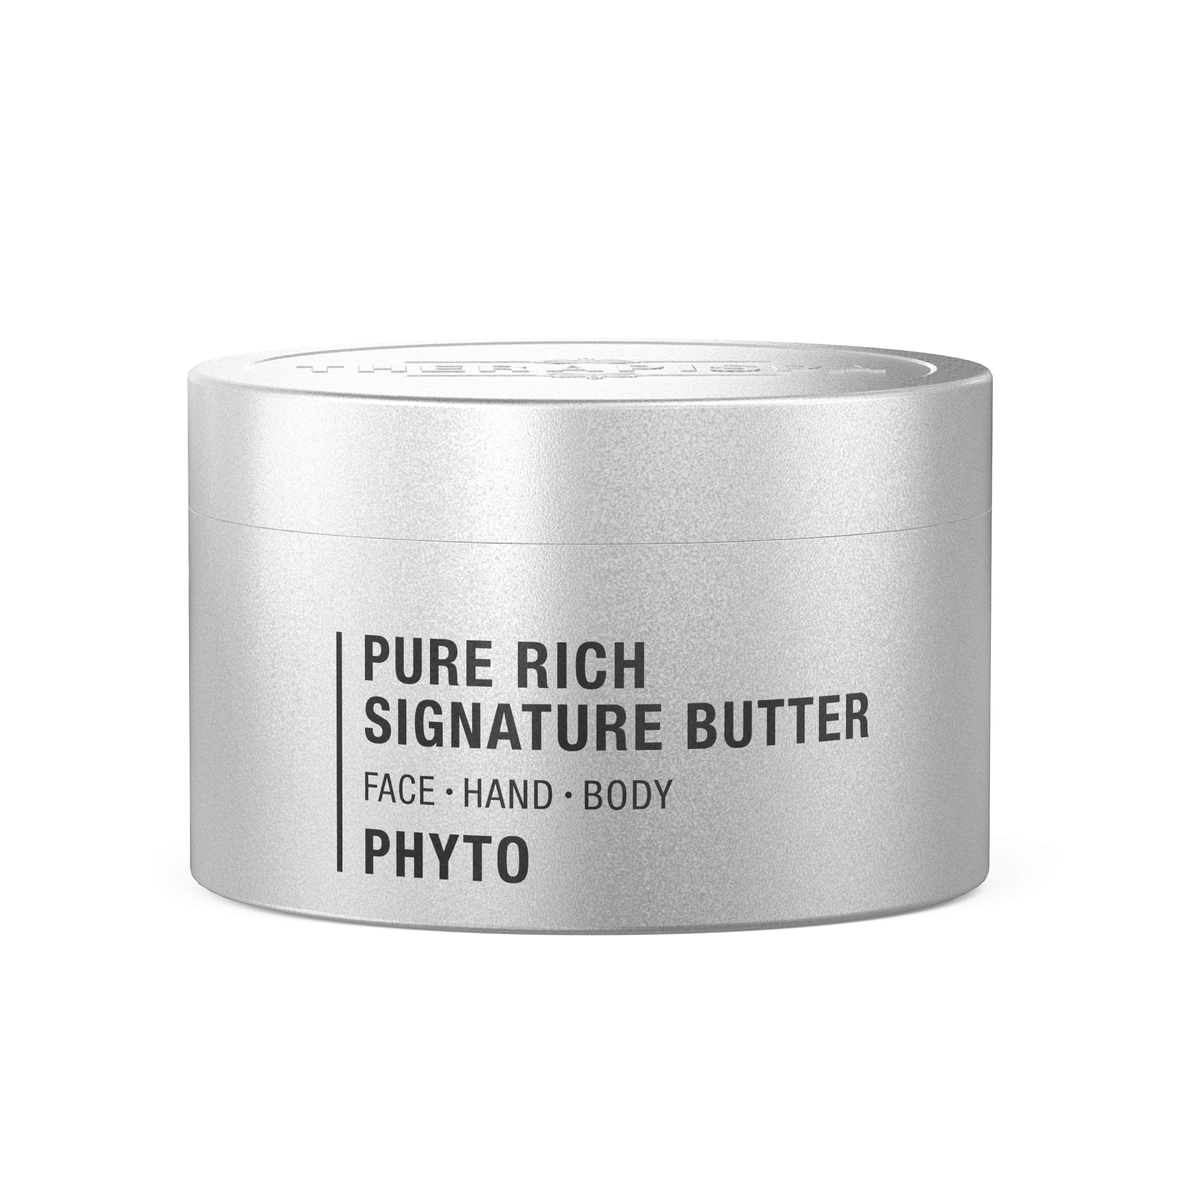 Pure Rich Signature Butter / Phyto